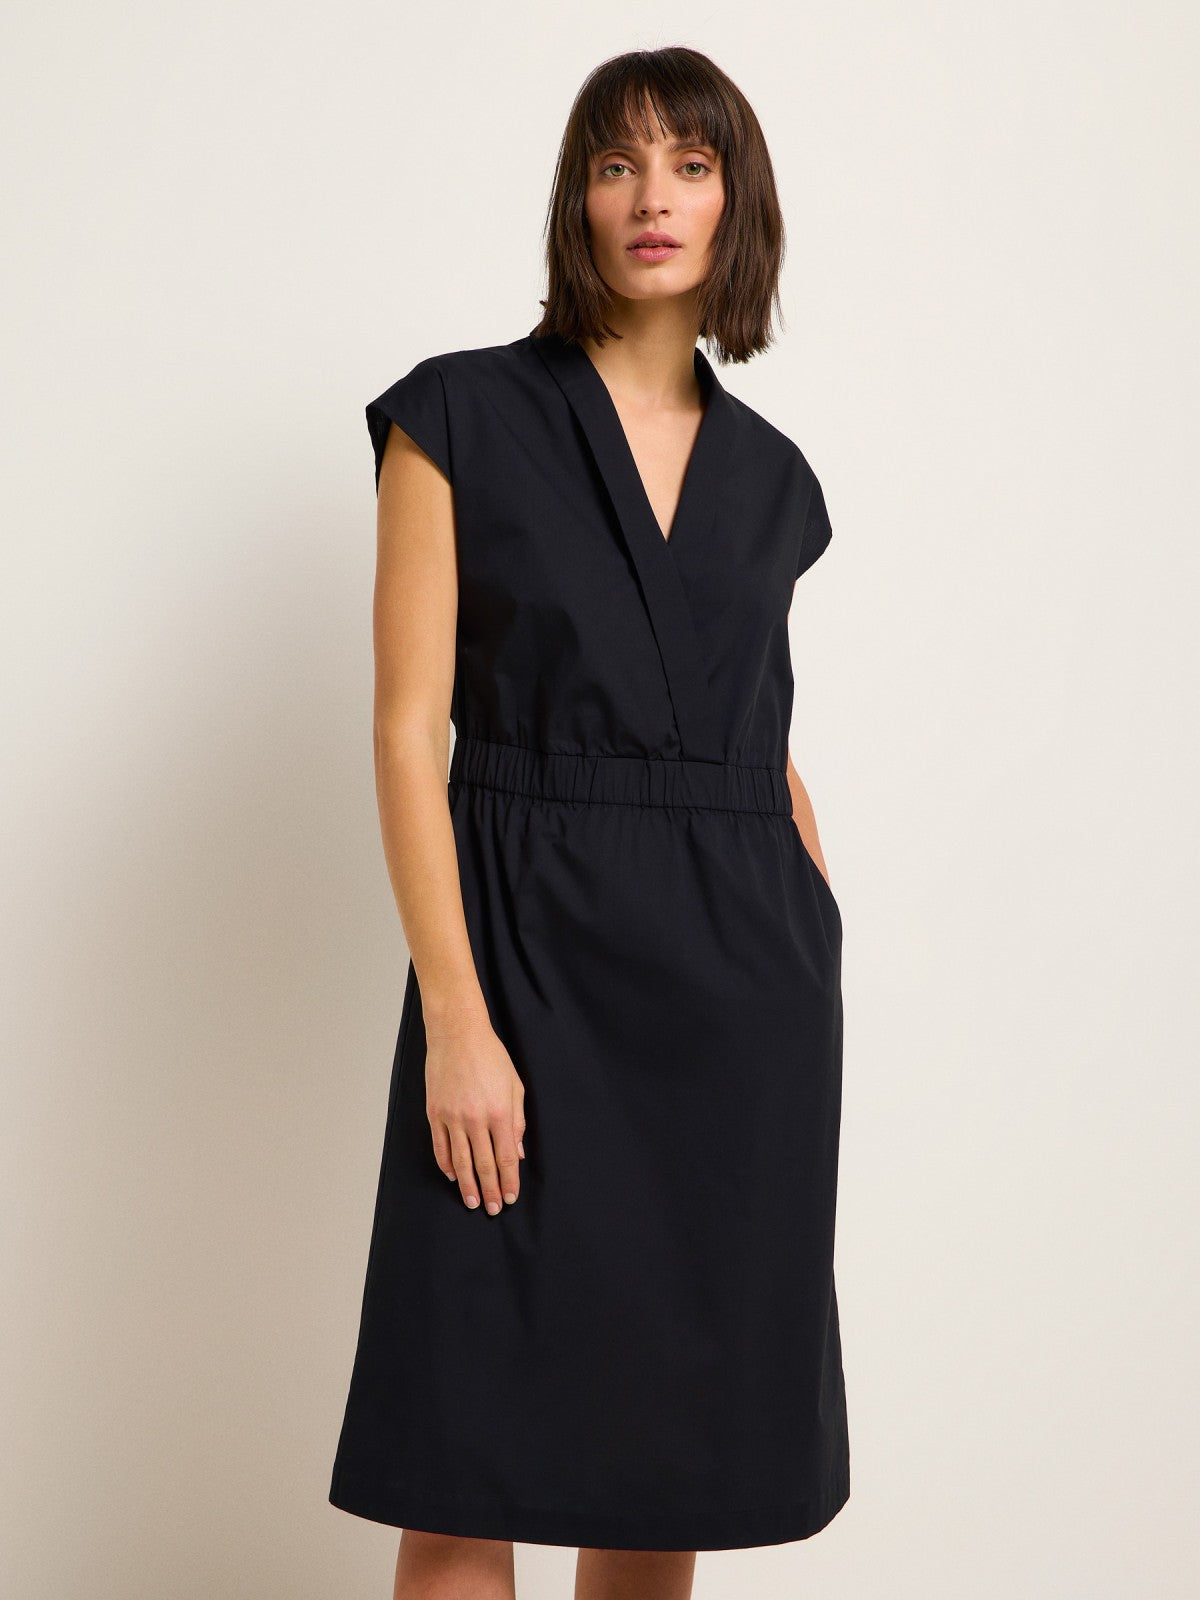 DRESS WITH MOCK NECK (GOTS) made of organic cotton - Black